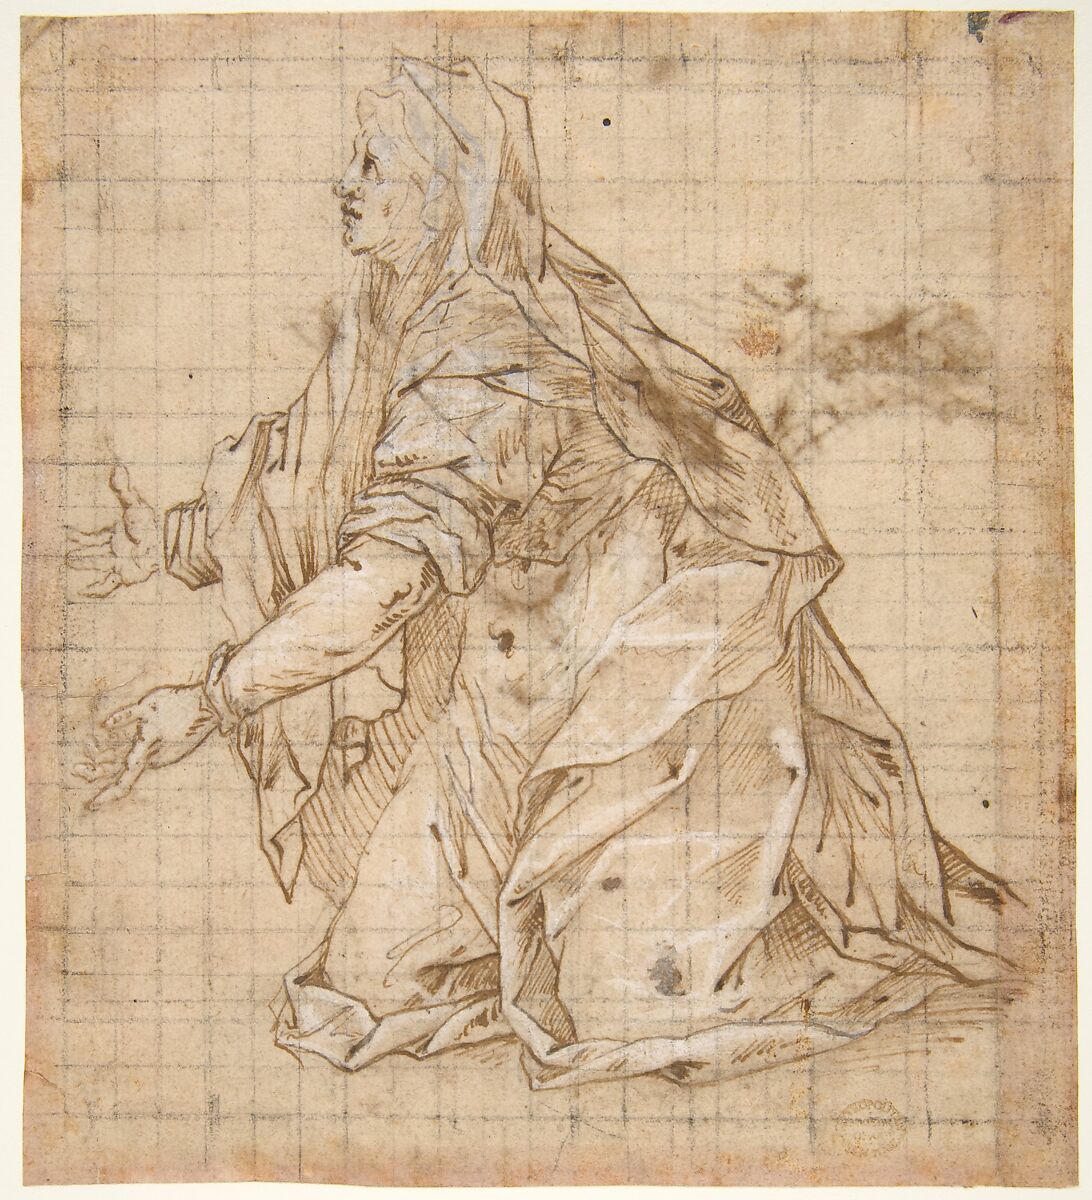 Woman Kneeling Facing Left (recto); Seated Woman Facing Right (verso), Giovanni Battista Trotti ("Il Malosso") (Italian, Cremona 1556–1619 Parma), Pen and brown ink, touched with white, over traces of black chalk, squared for transfer in black chalk (recto), pen and brown ink (verso) 